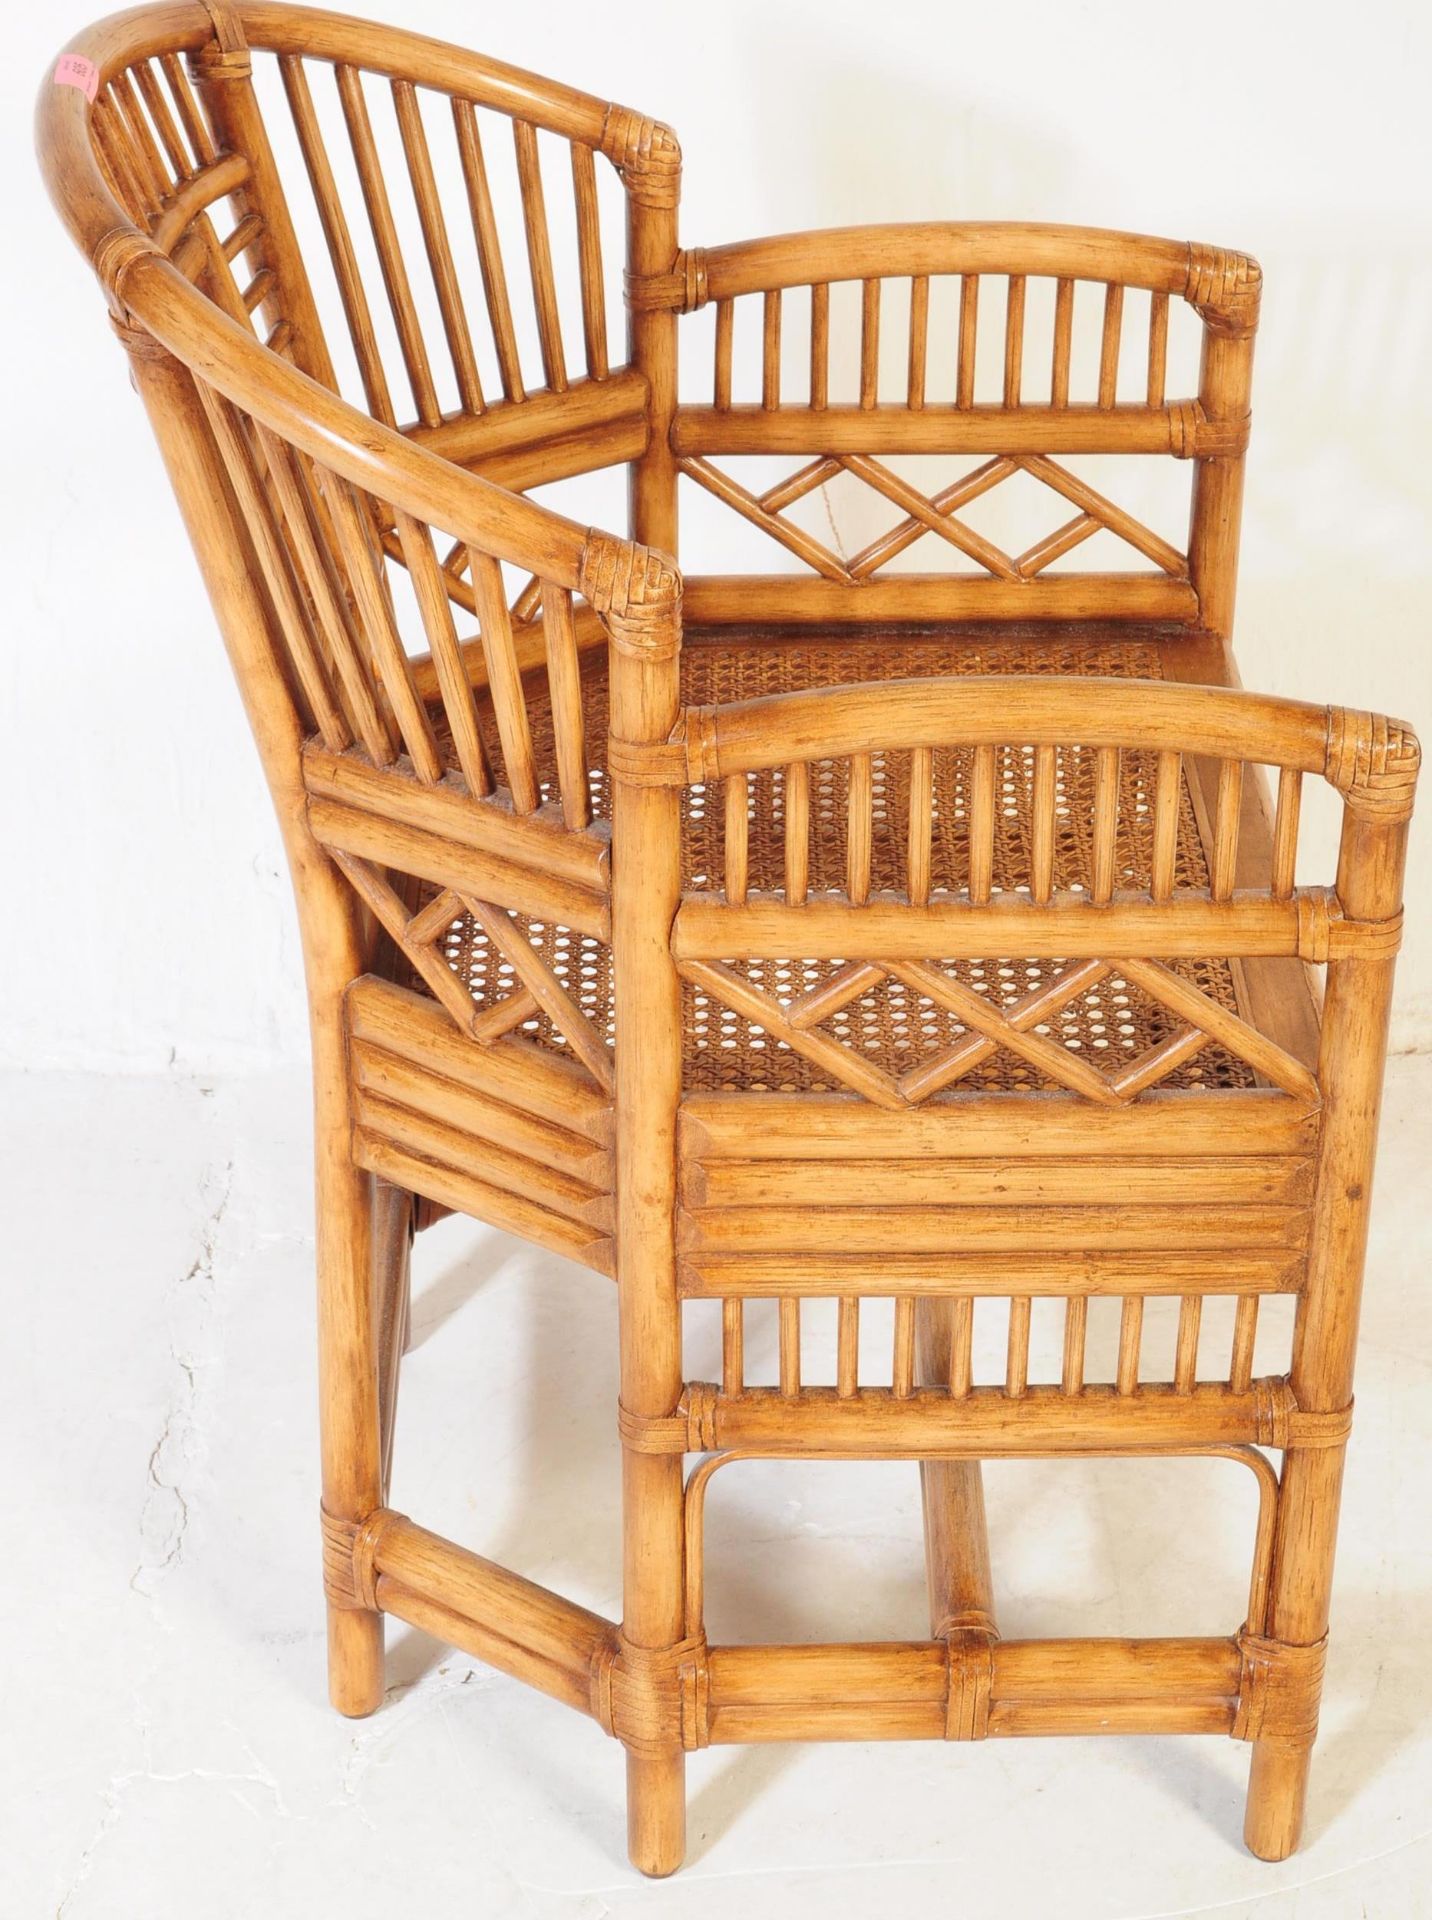 MID CENTURY 1960S BAMBOO ITALIAN STYLE CONSERVATORY CHAIR - Image 4 of 7